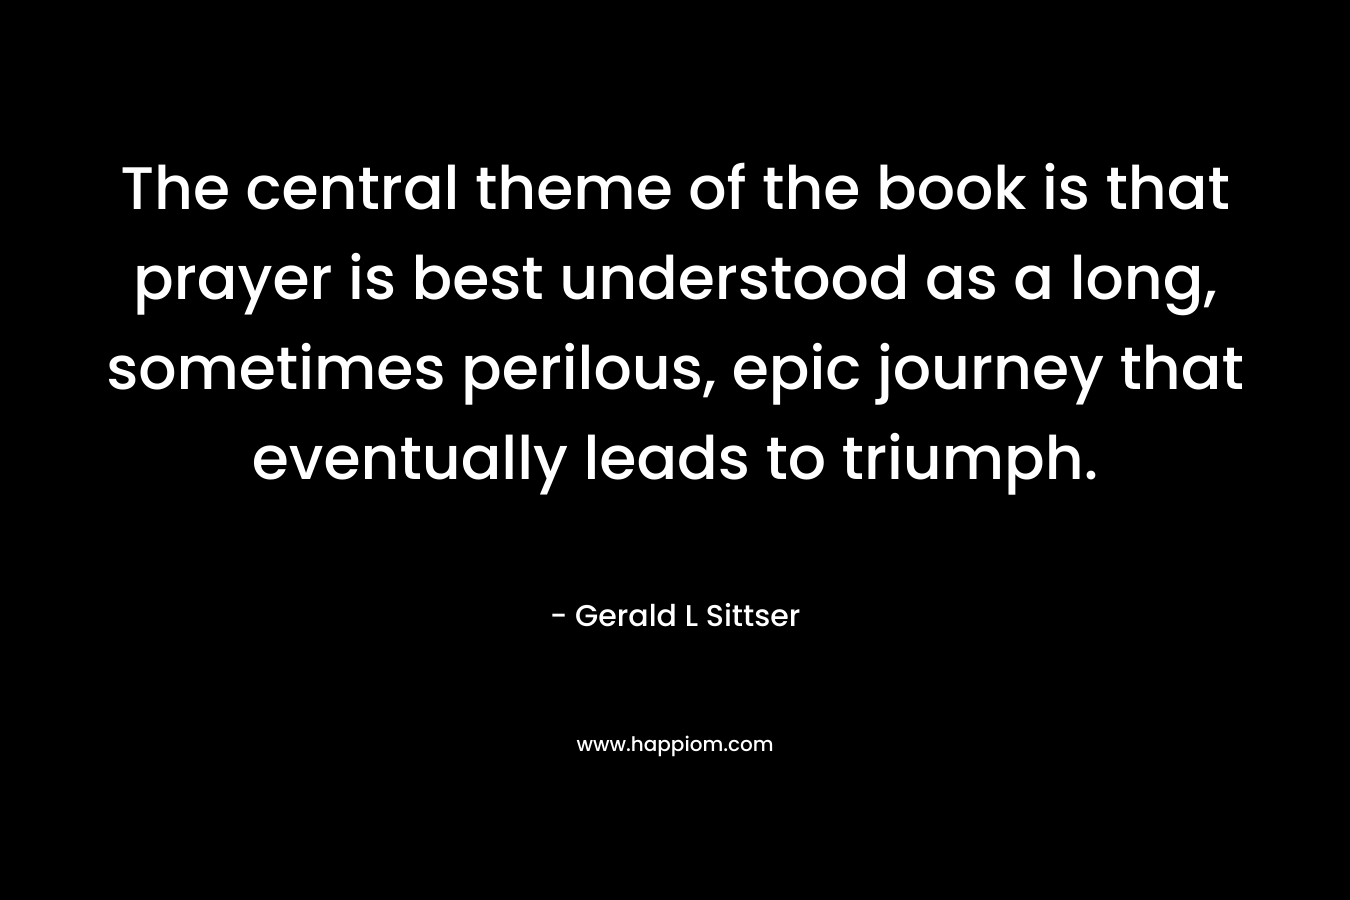 The central theme of the book is that prayer is best understood as a long, sometimes perilous, epic journey that eventually leads to triumph. – Gerald L Sittser